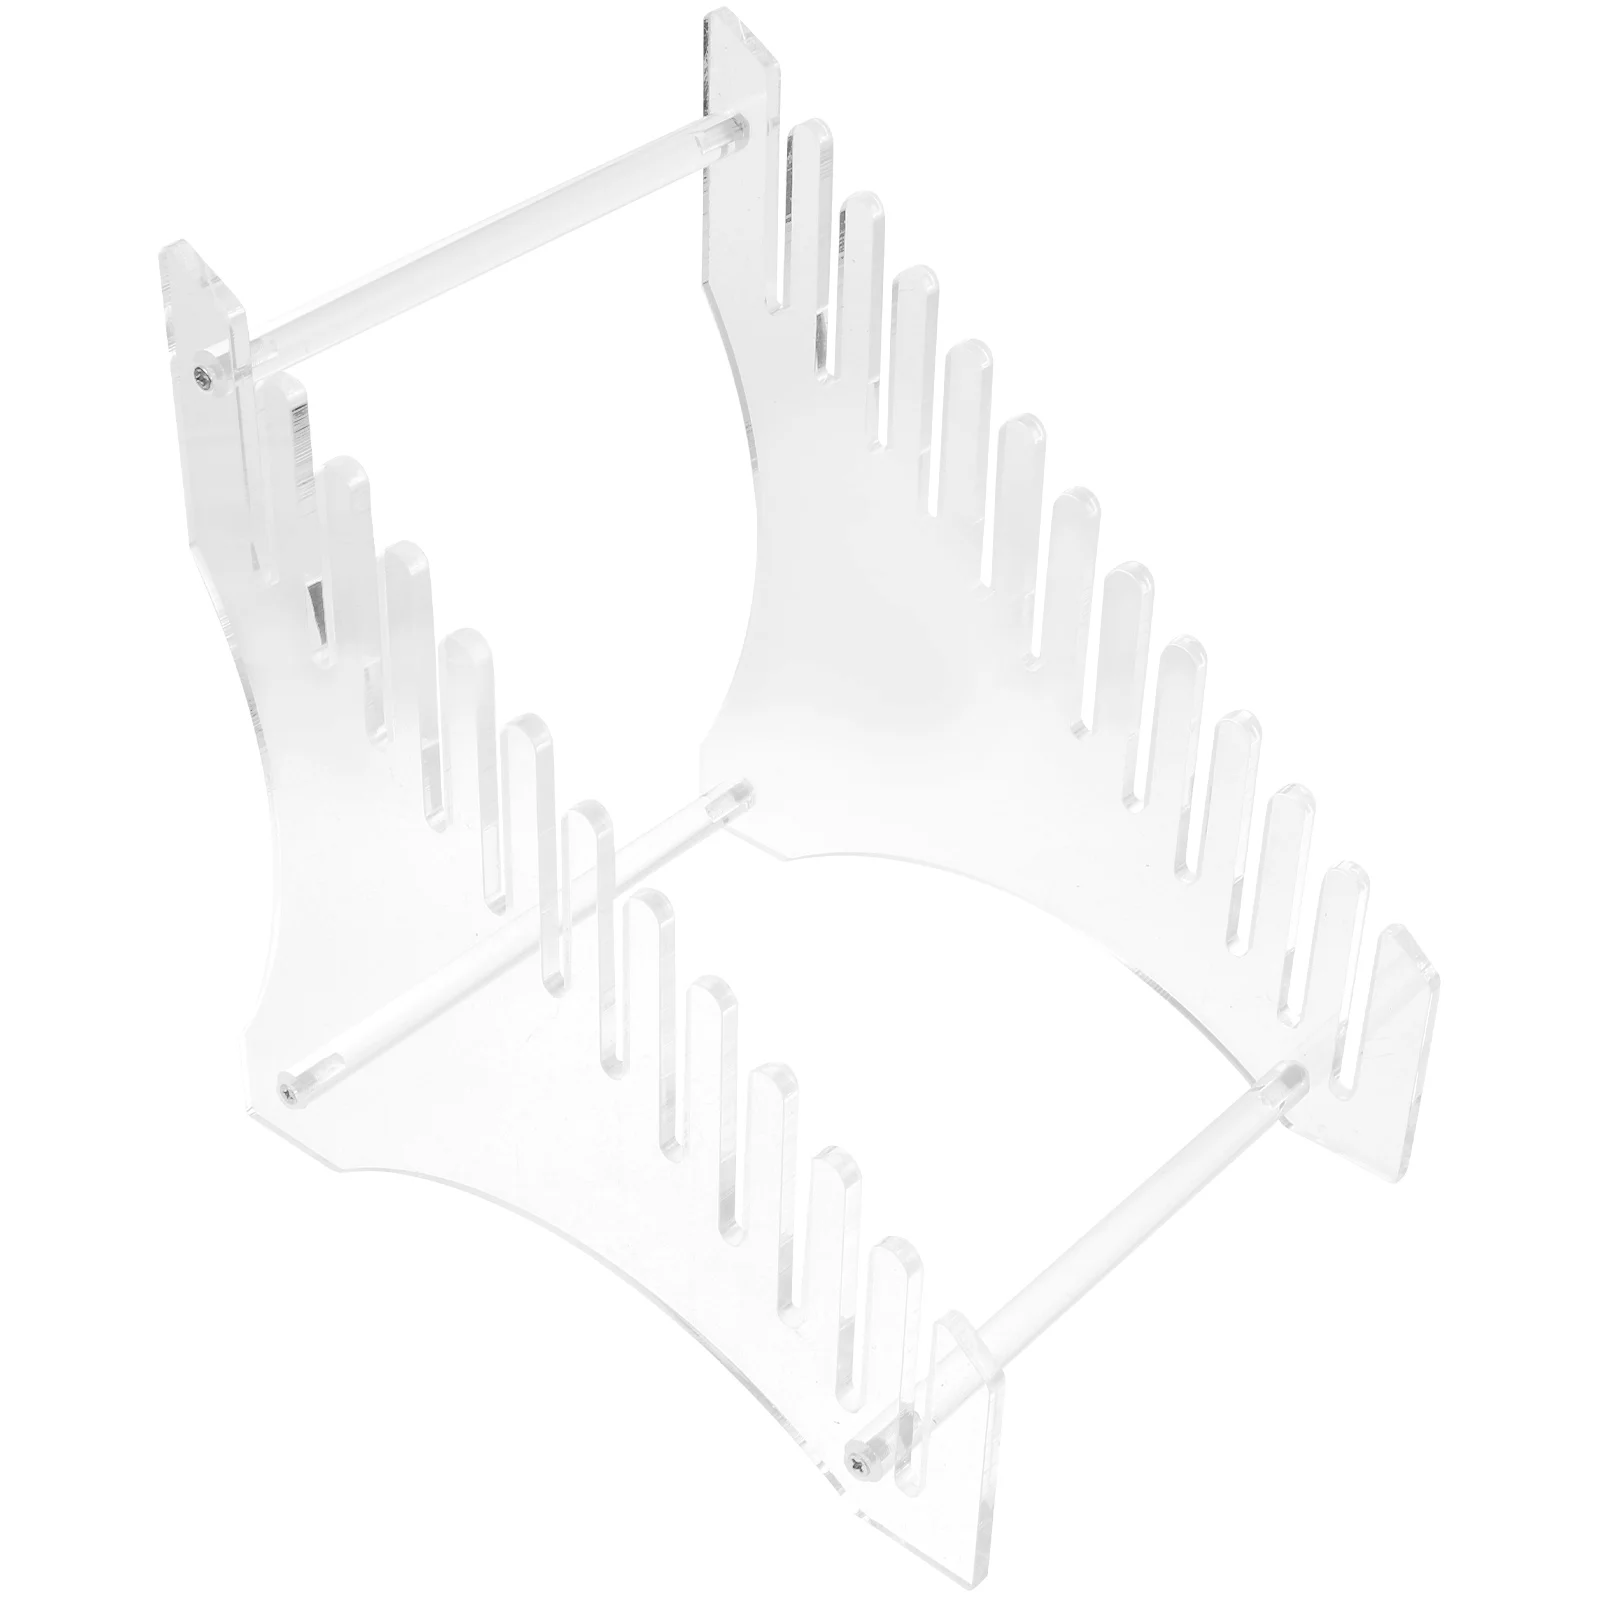 

Tabletop Vinyl Record Shelf Clear Acrylic Display Rack Tiered Storage Display Rack for Pictures Records Magazines